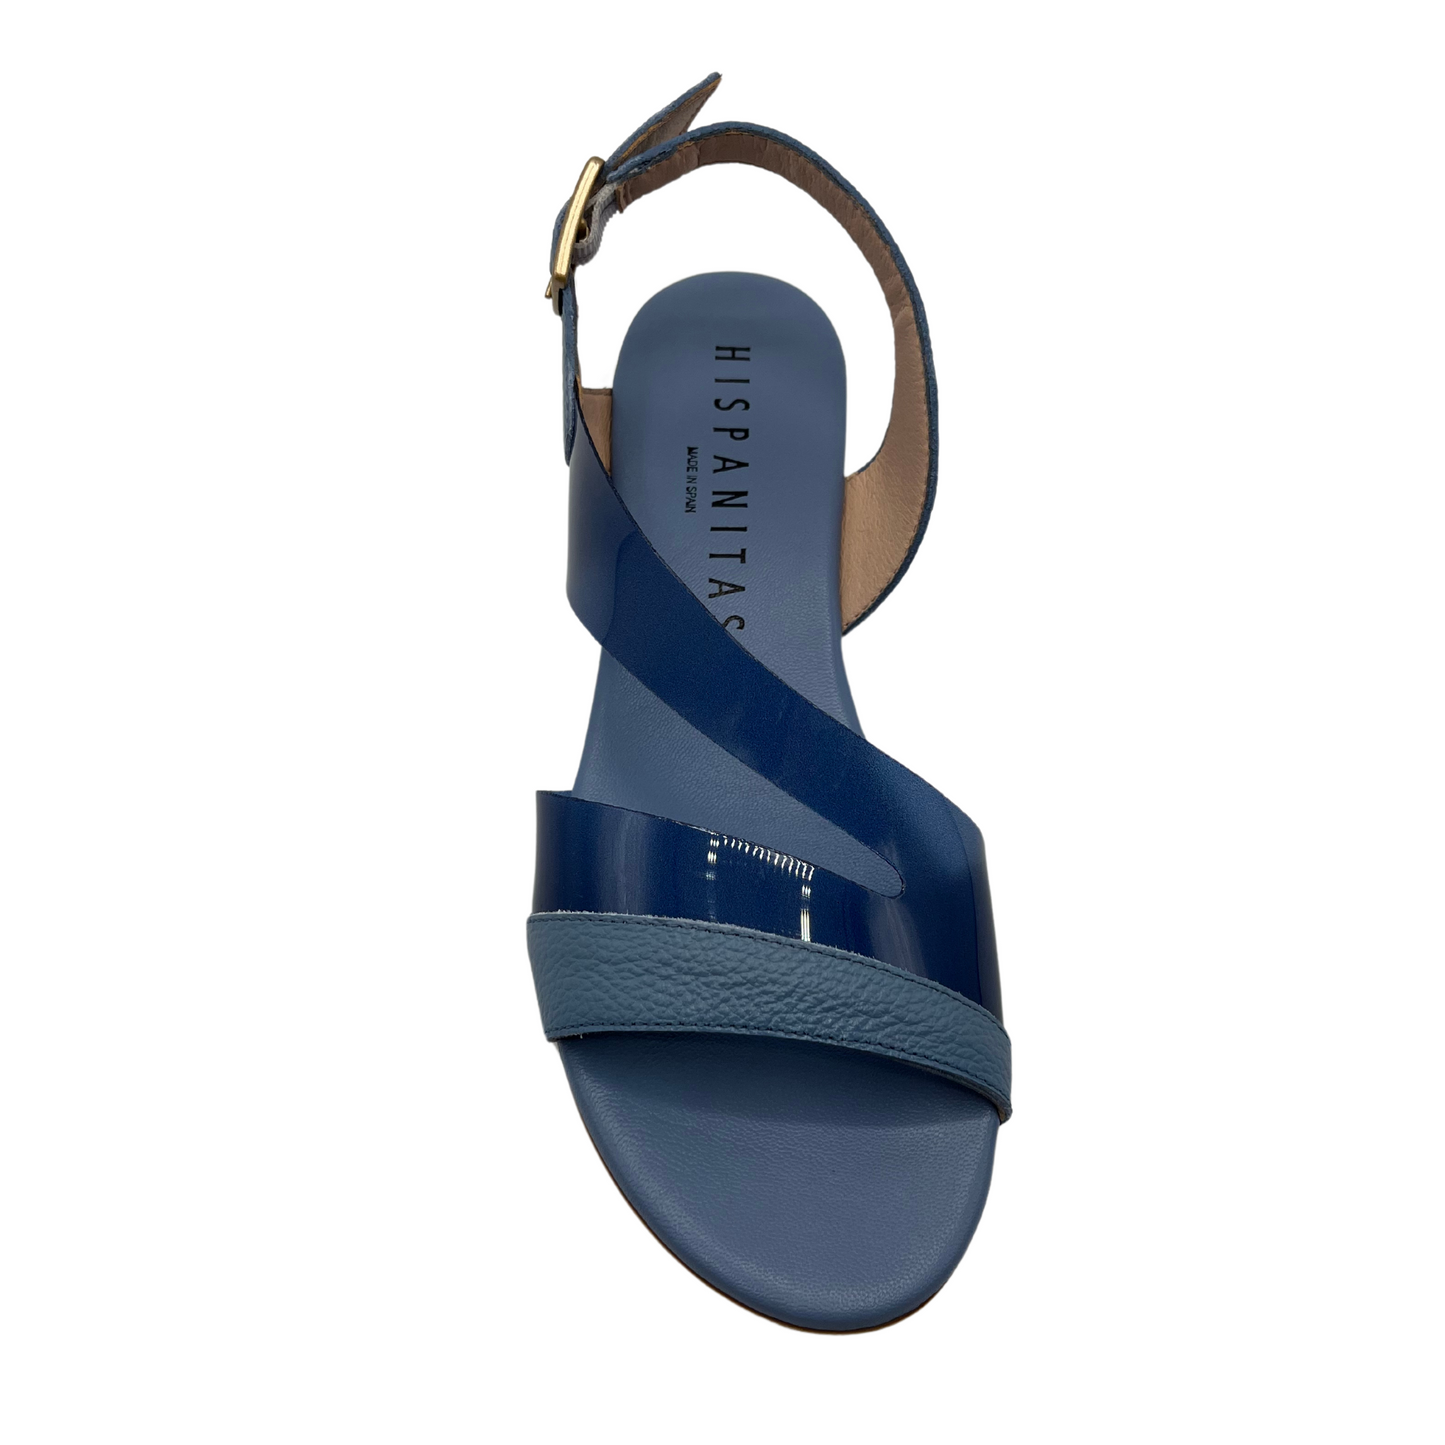 Top view of blue leather and vinyl sandal with buckle strap and low heel